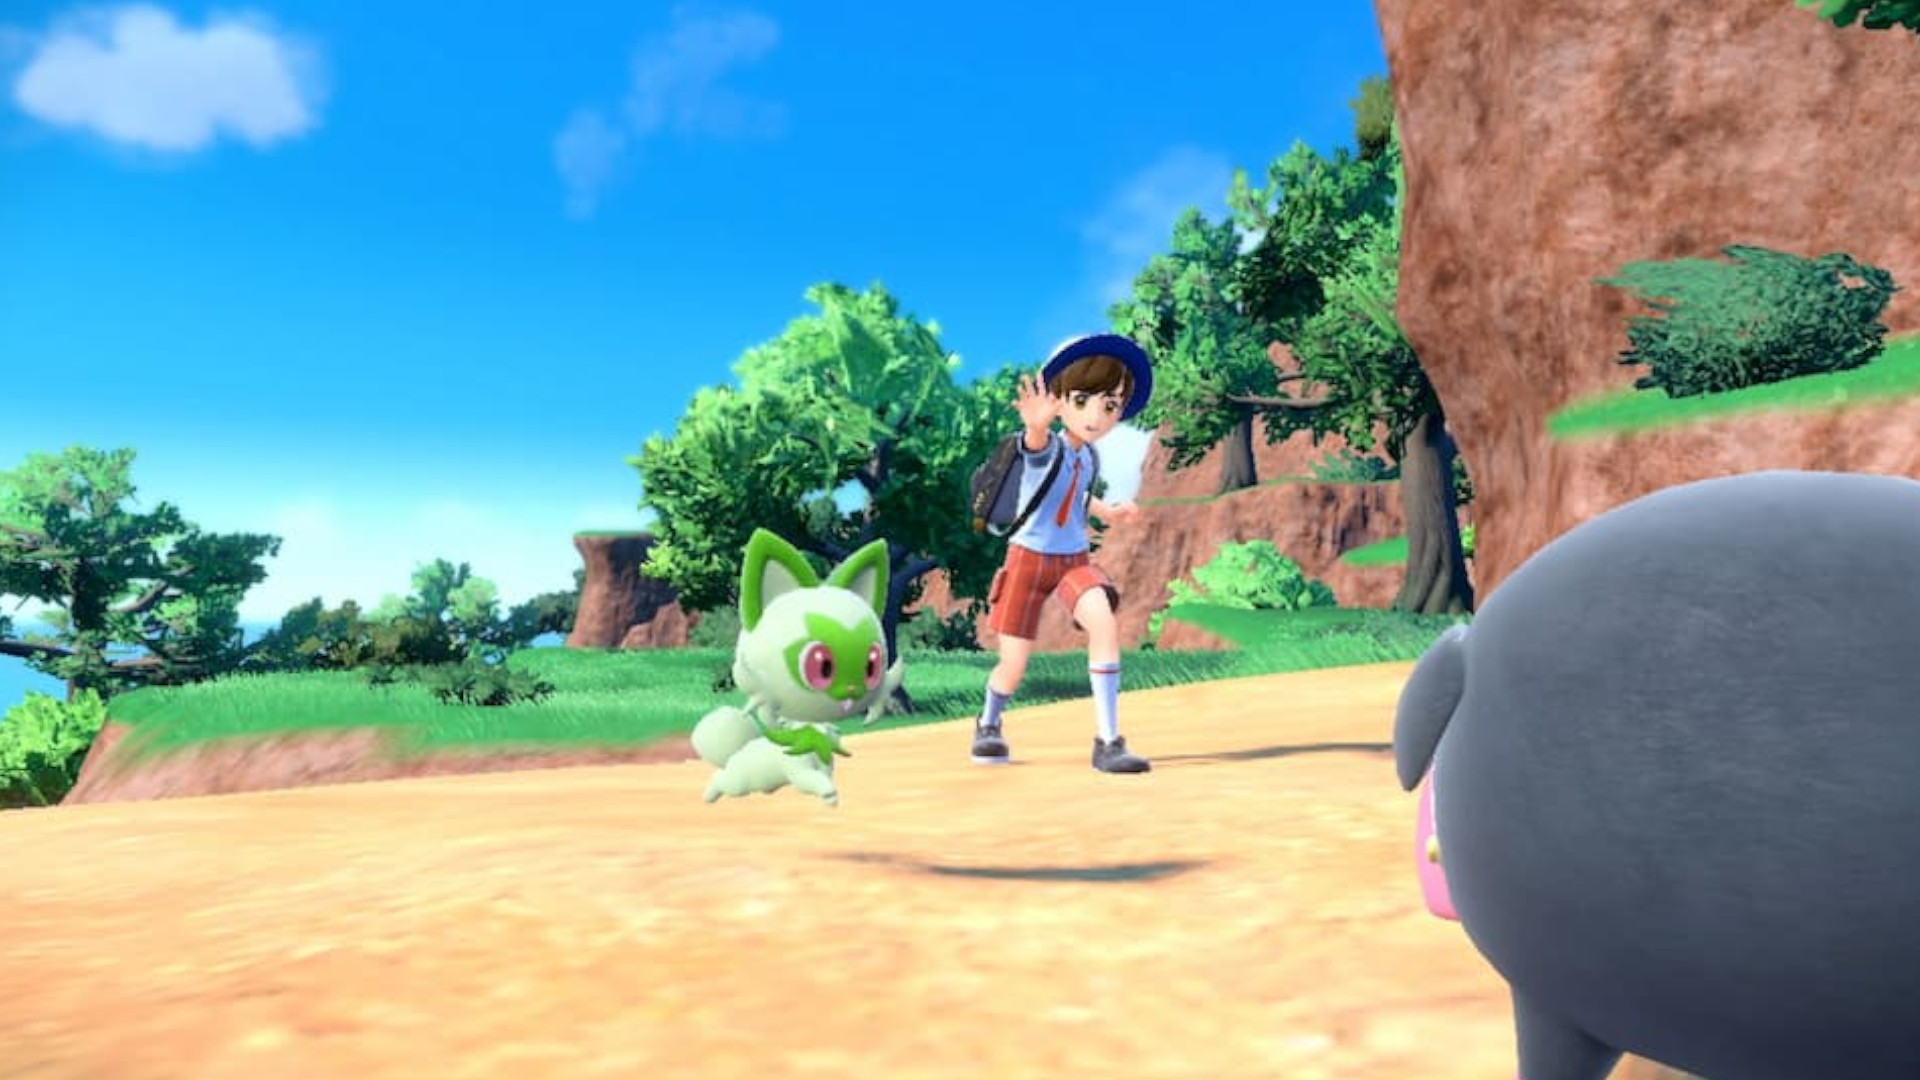 The Pokemon Scarlet and Violet version exclusives and differences explained